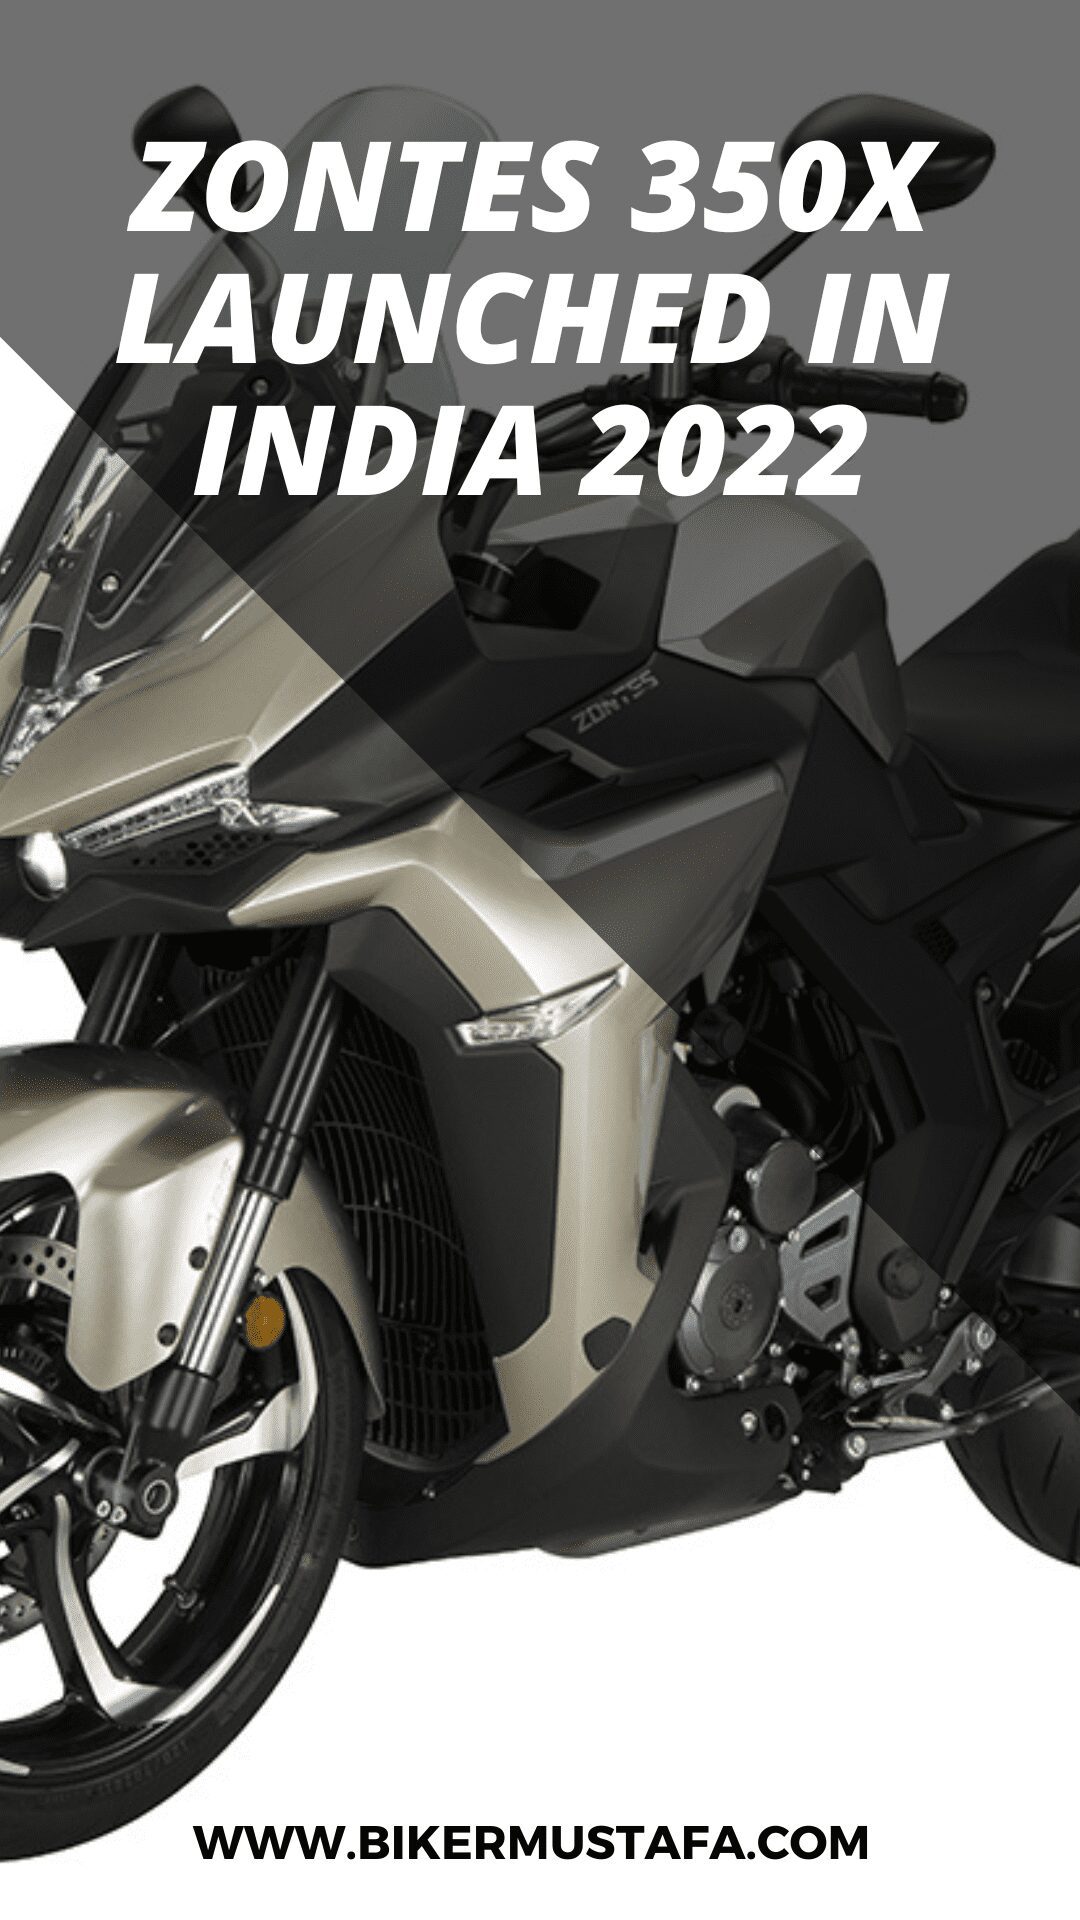 Zontes 350X Launched In India 2022